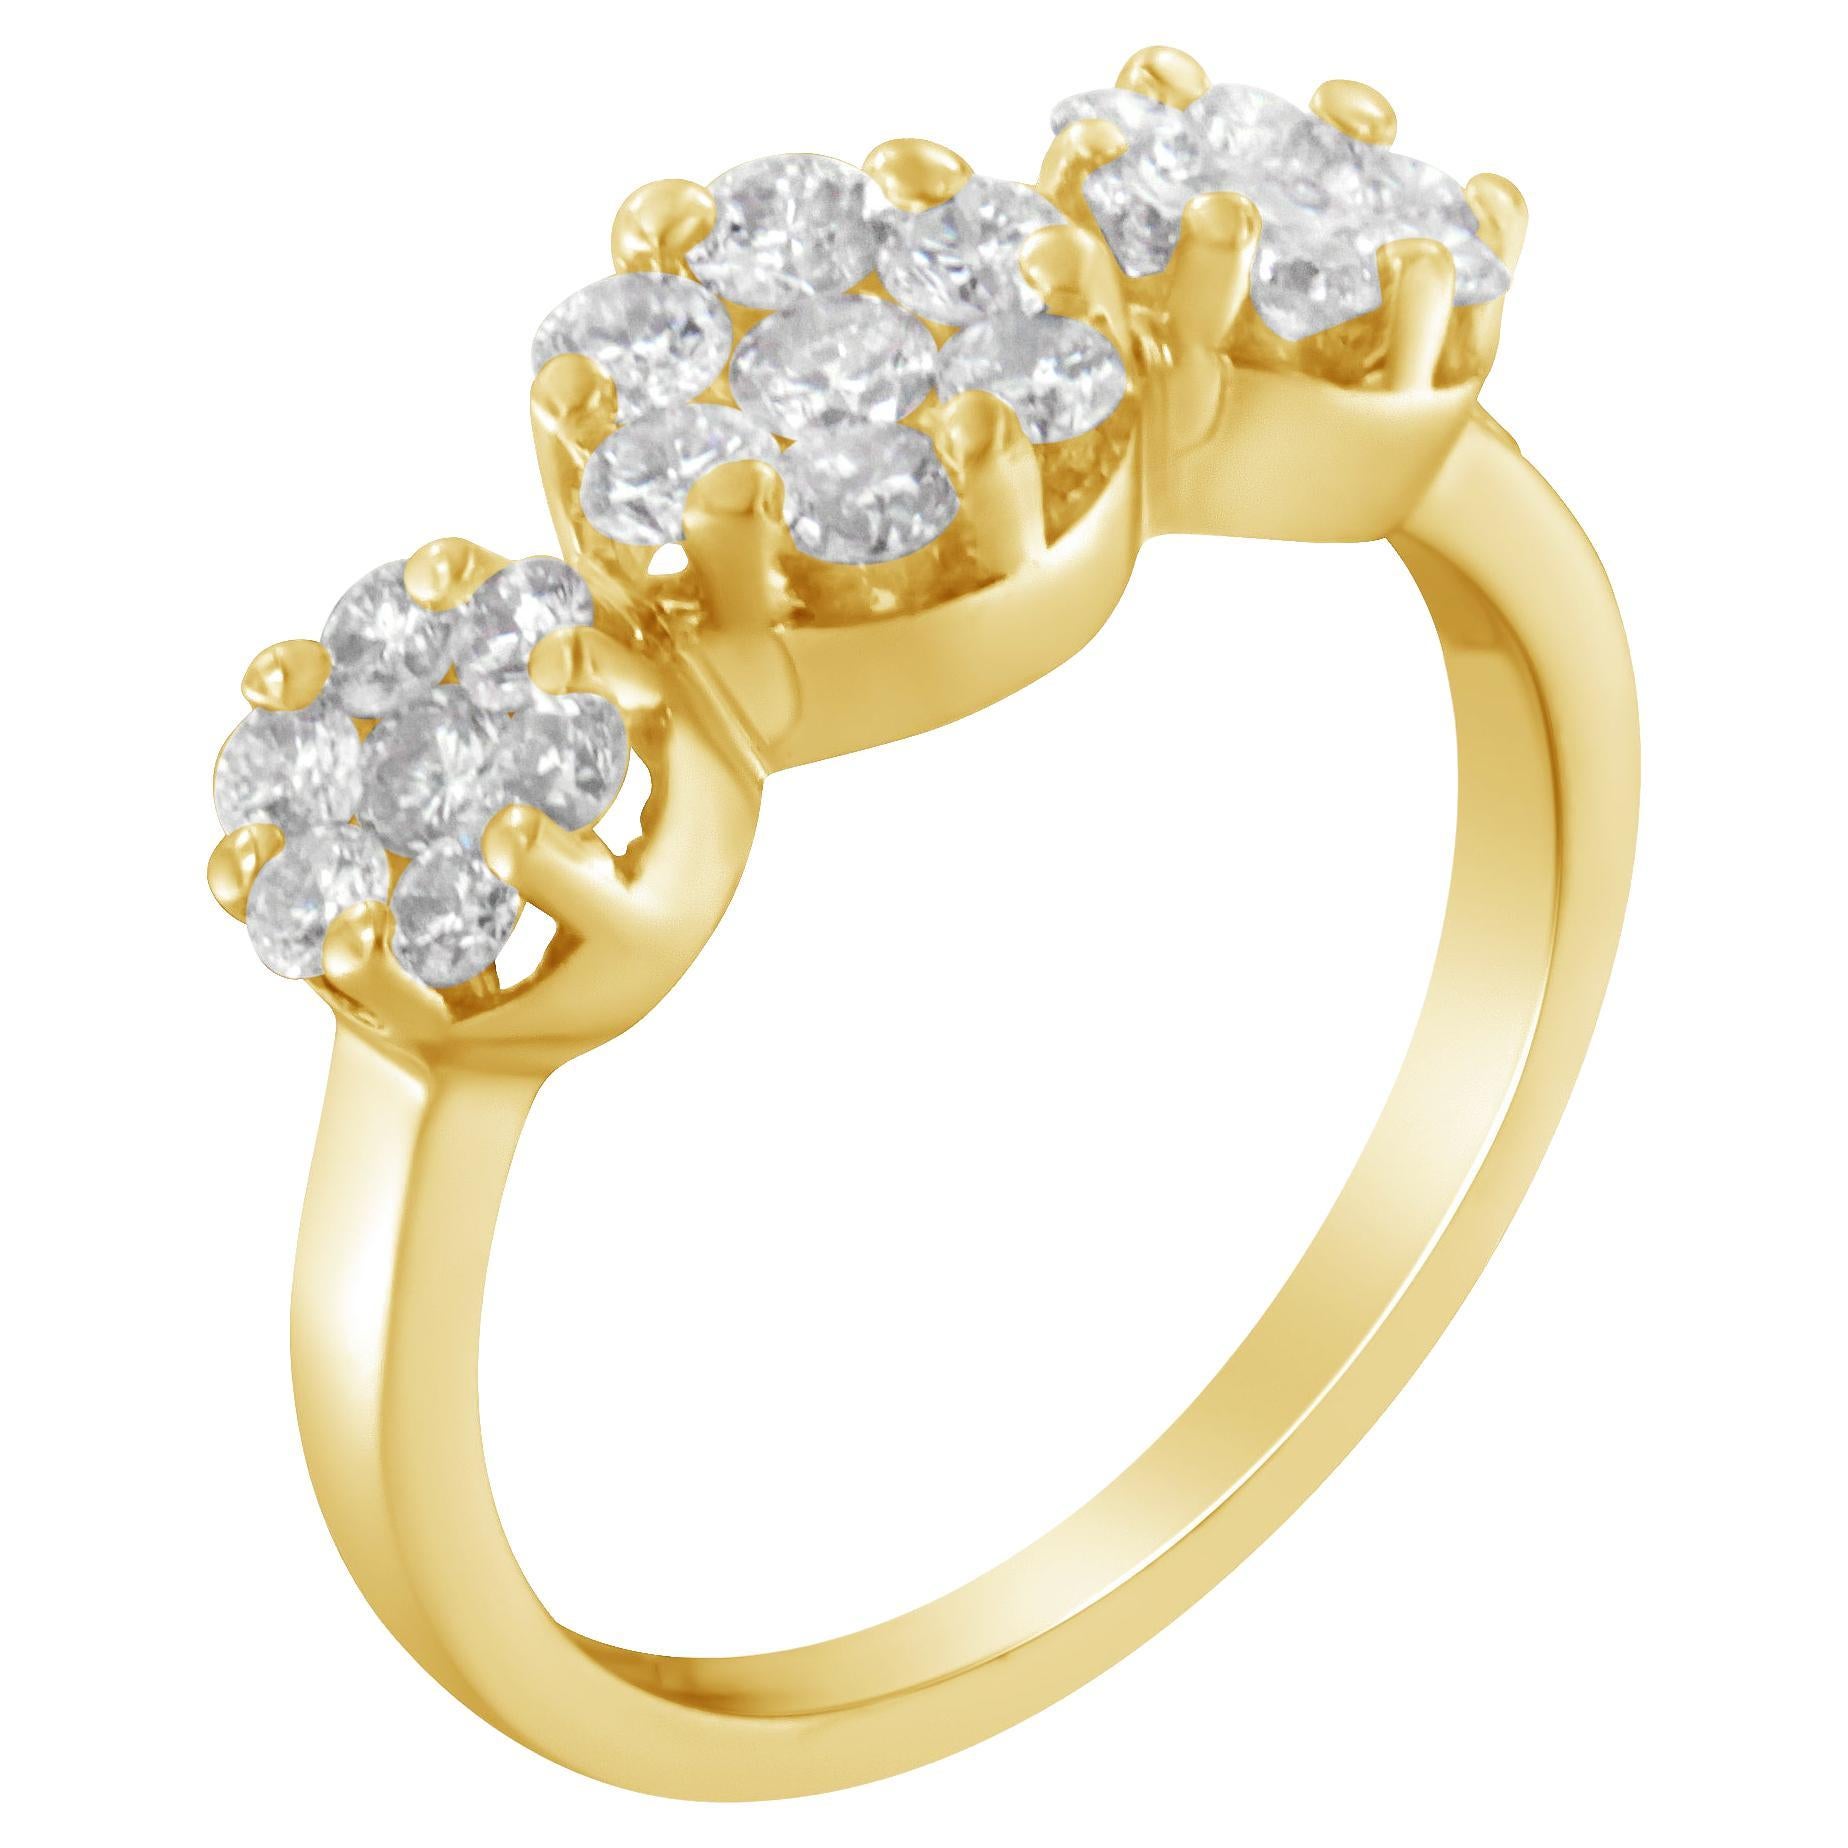 For Sale:  14K Yellow Gold 1 1/4 Carat Round-Cut Diamond Cluster Ring